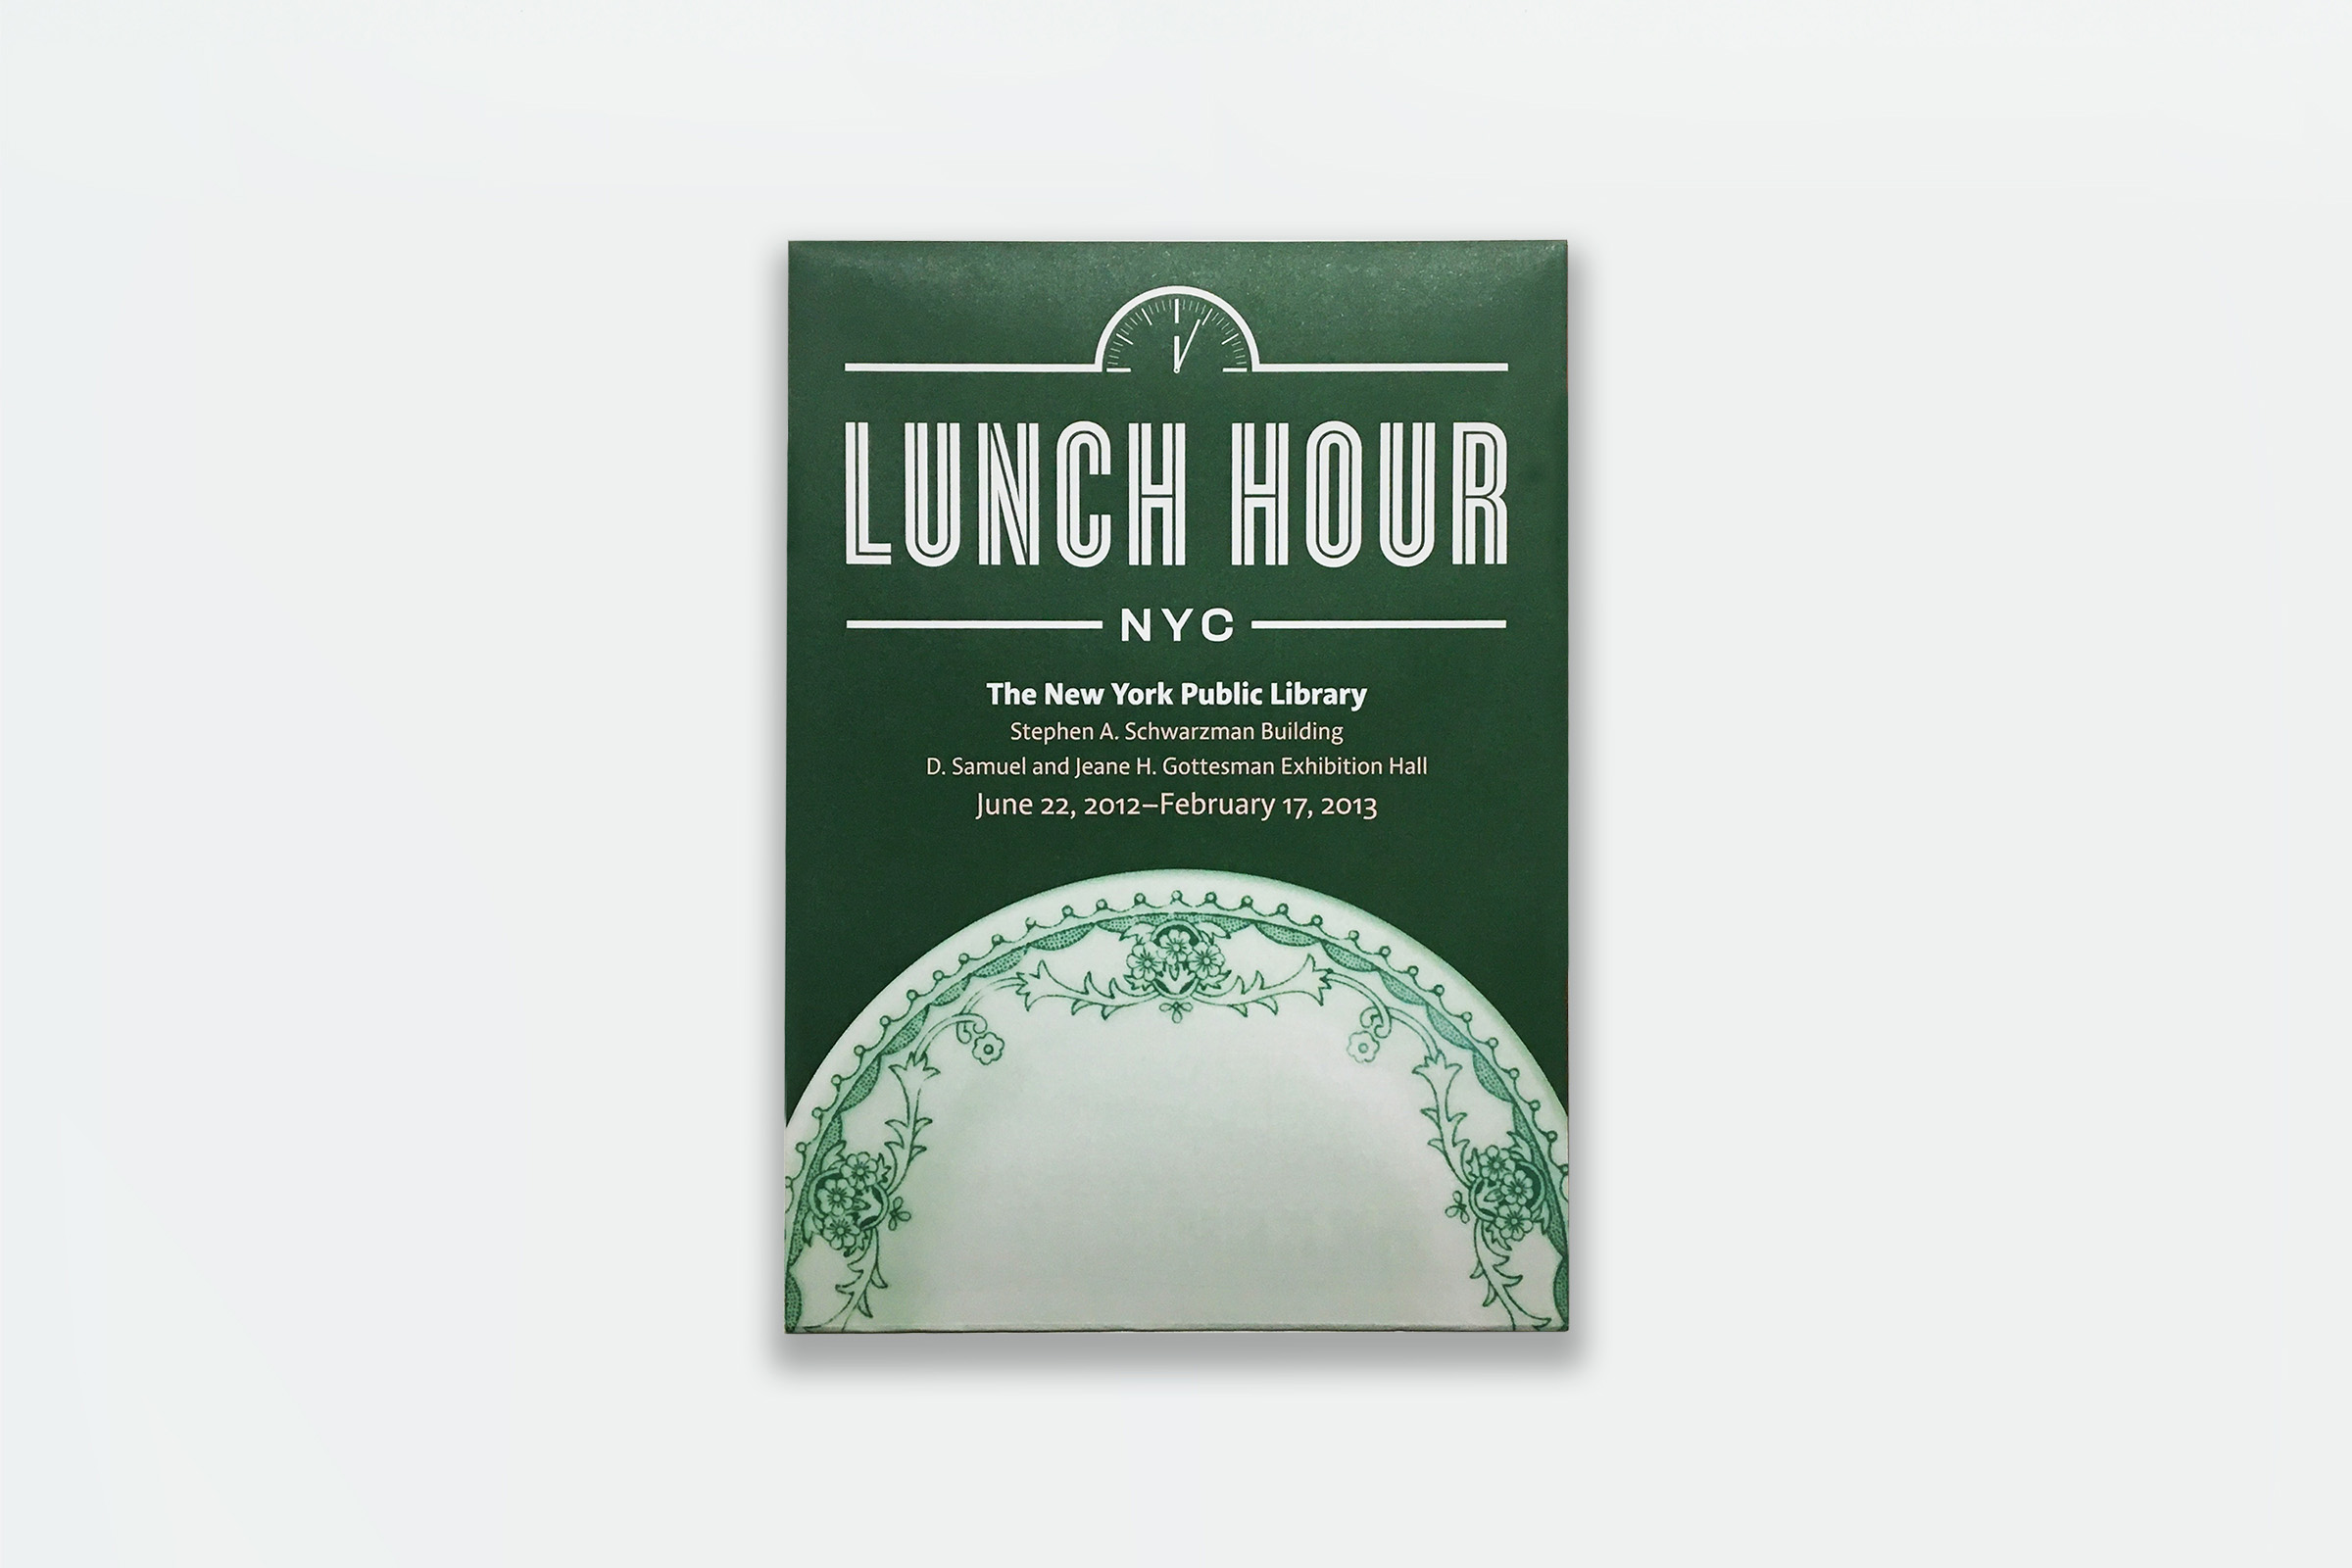 Pure+Applied designed the Lunch Hour NYC exhibition brochure.